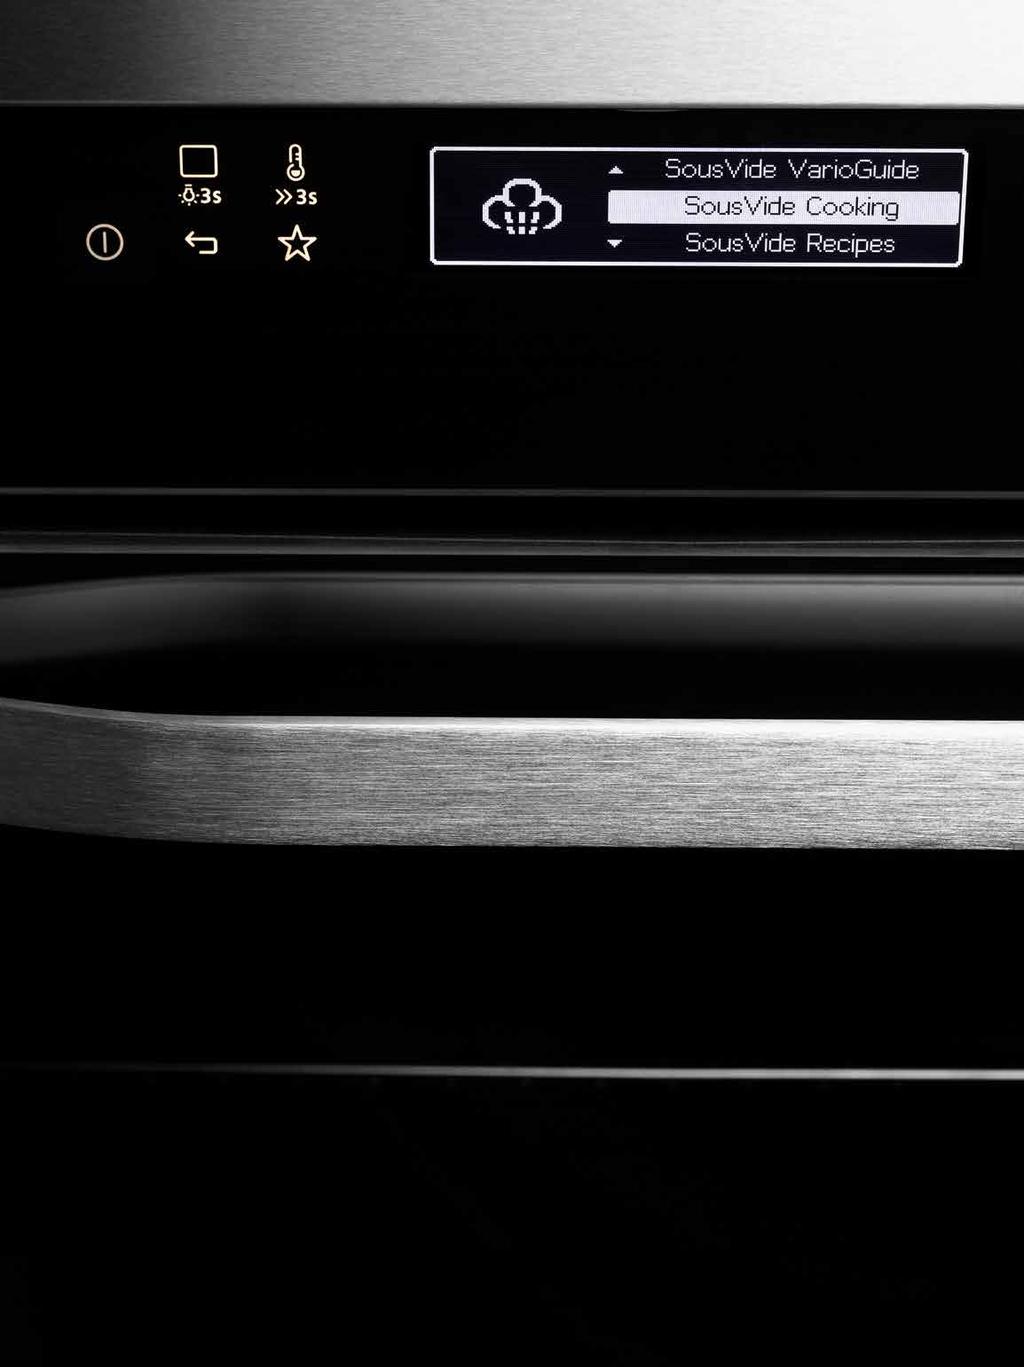 Cooking Efficient, easier to look after and with special features to make home cooking more delicious than ever, our ovens, hobs and range cookers are designed to make the very most of your time in